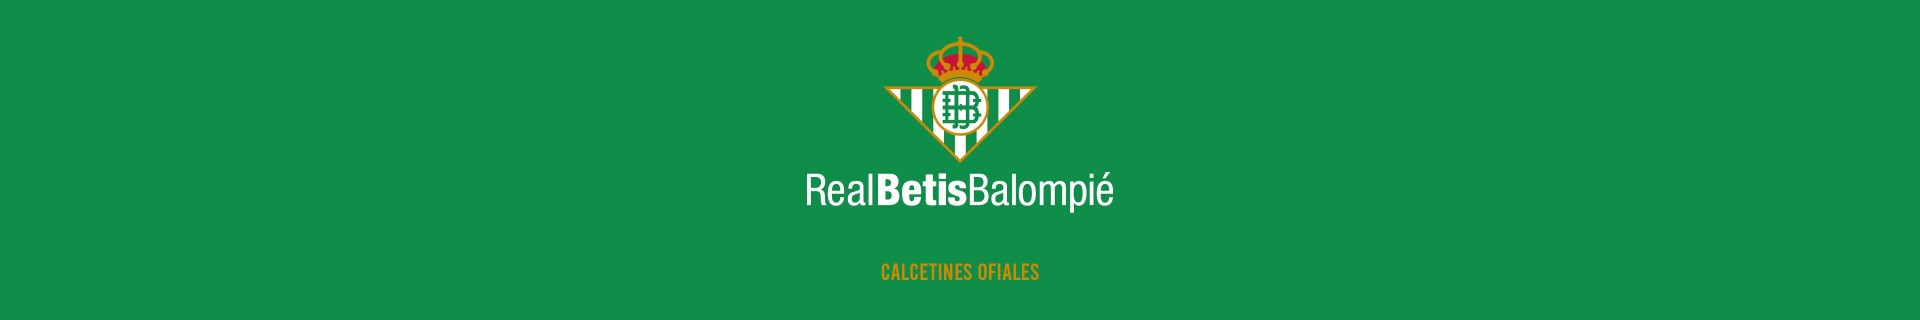 Calcetines Oficiales del Real Betis Balompié